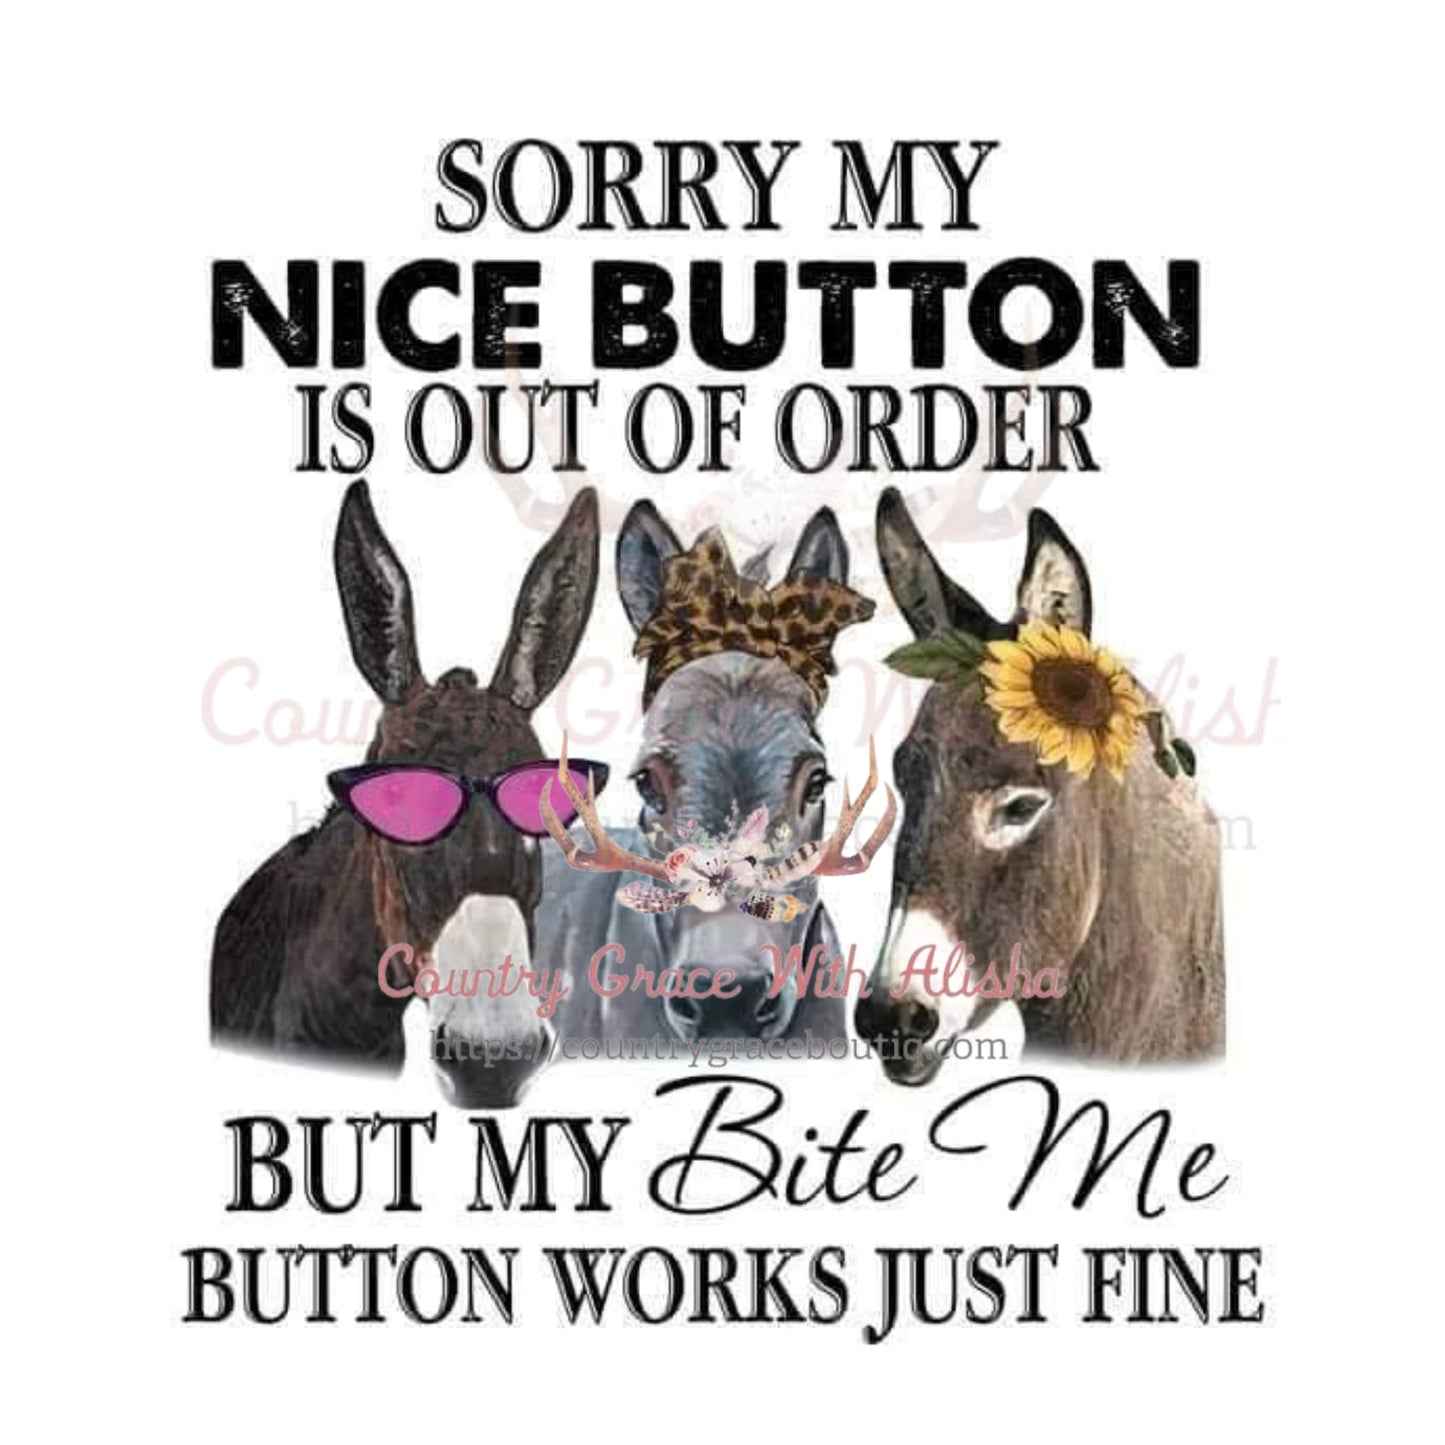 Nice Button Sublimation Transfer - Sub $1.50 Country Grace 